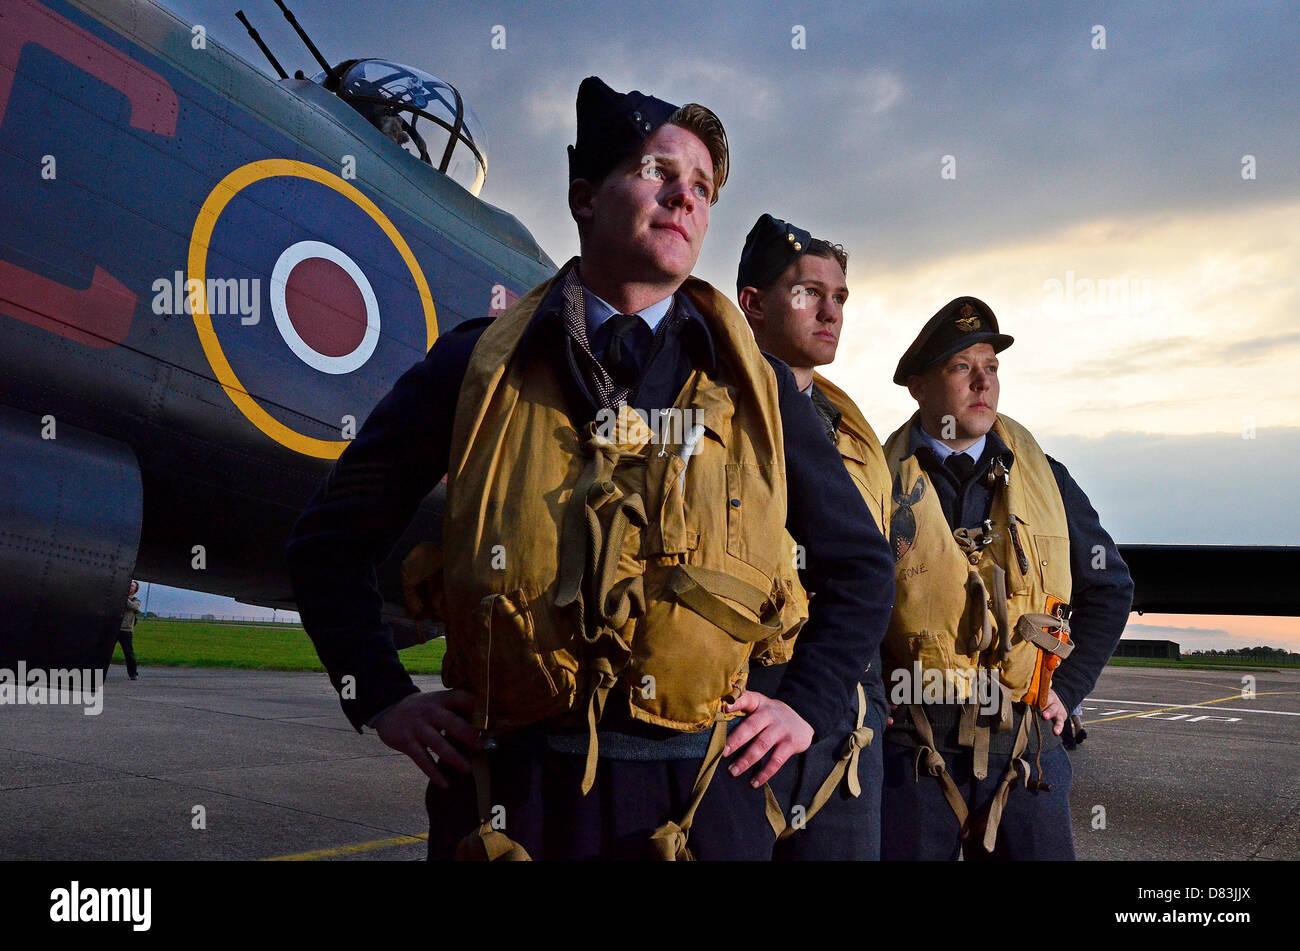 RAF Scampton, Lincolnshire, UK. 16th May 2013. WWII re-enactors Richard Bass, Dean Bryan and Vincent Scopes with B of B memorial Lancaster Bomber at RAF Scampton, Lincs., for the sunset memorial, 16-May-2013. Photo by John Robertson/Alamy Live News Stock Photo